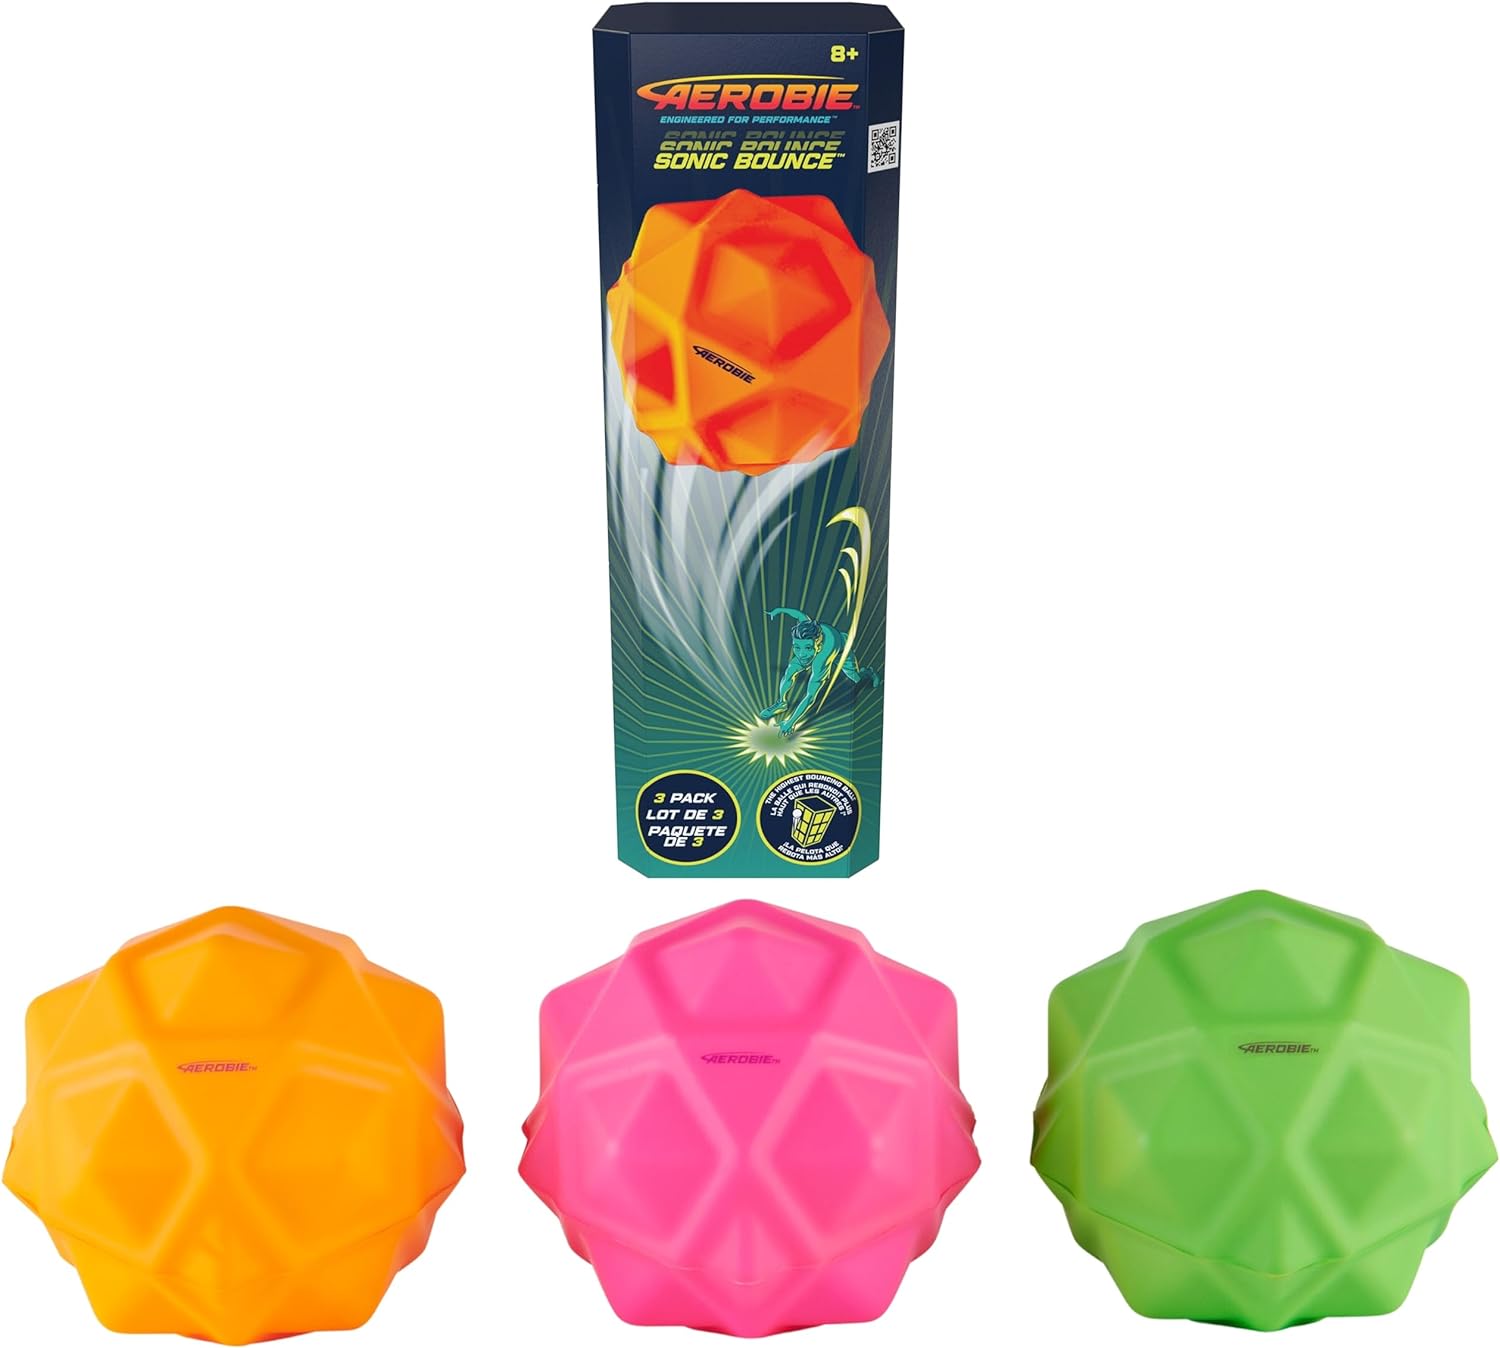 Aerobie: 3-Count Sonic Bounce Balls $5 ($1.66 each) or 3-Piece Flying Rings $15 ($5 each) + Free Shipping w/ Prime